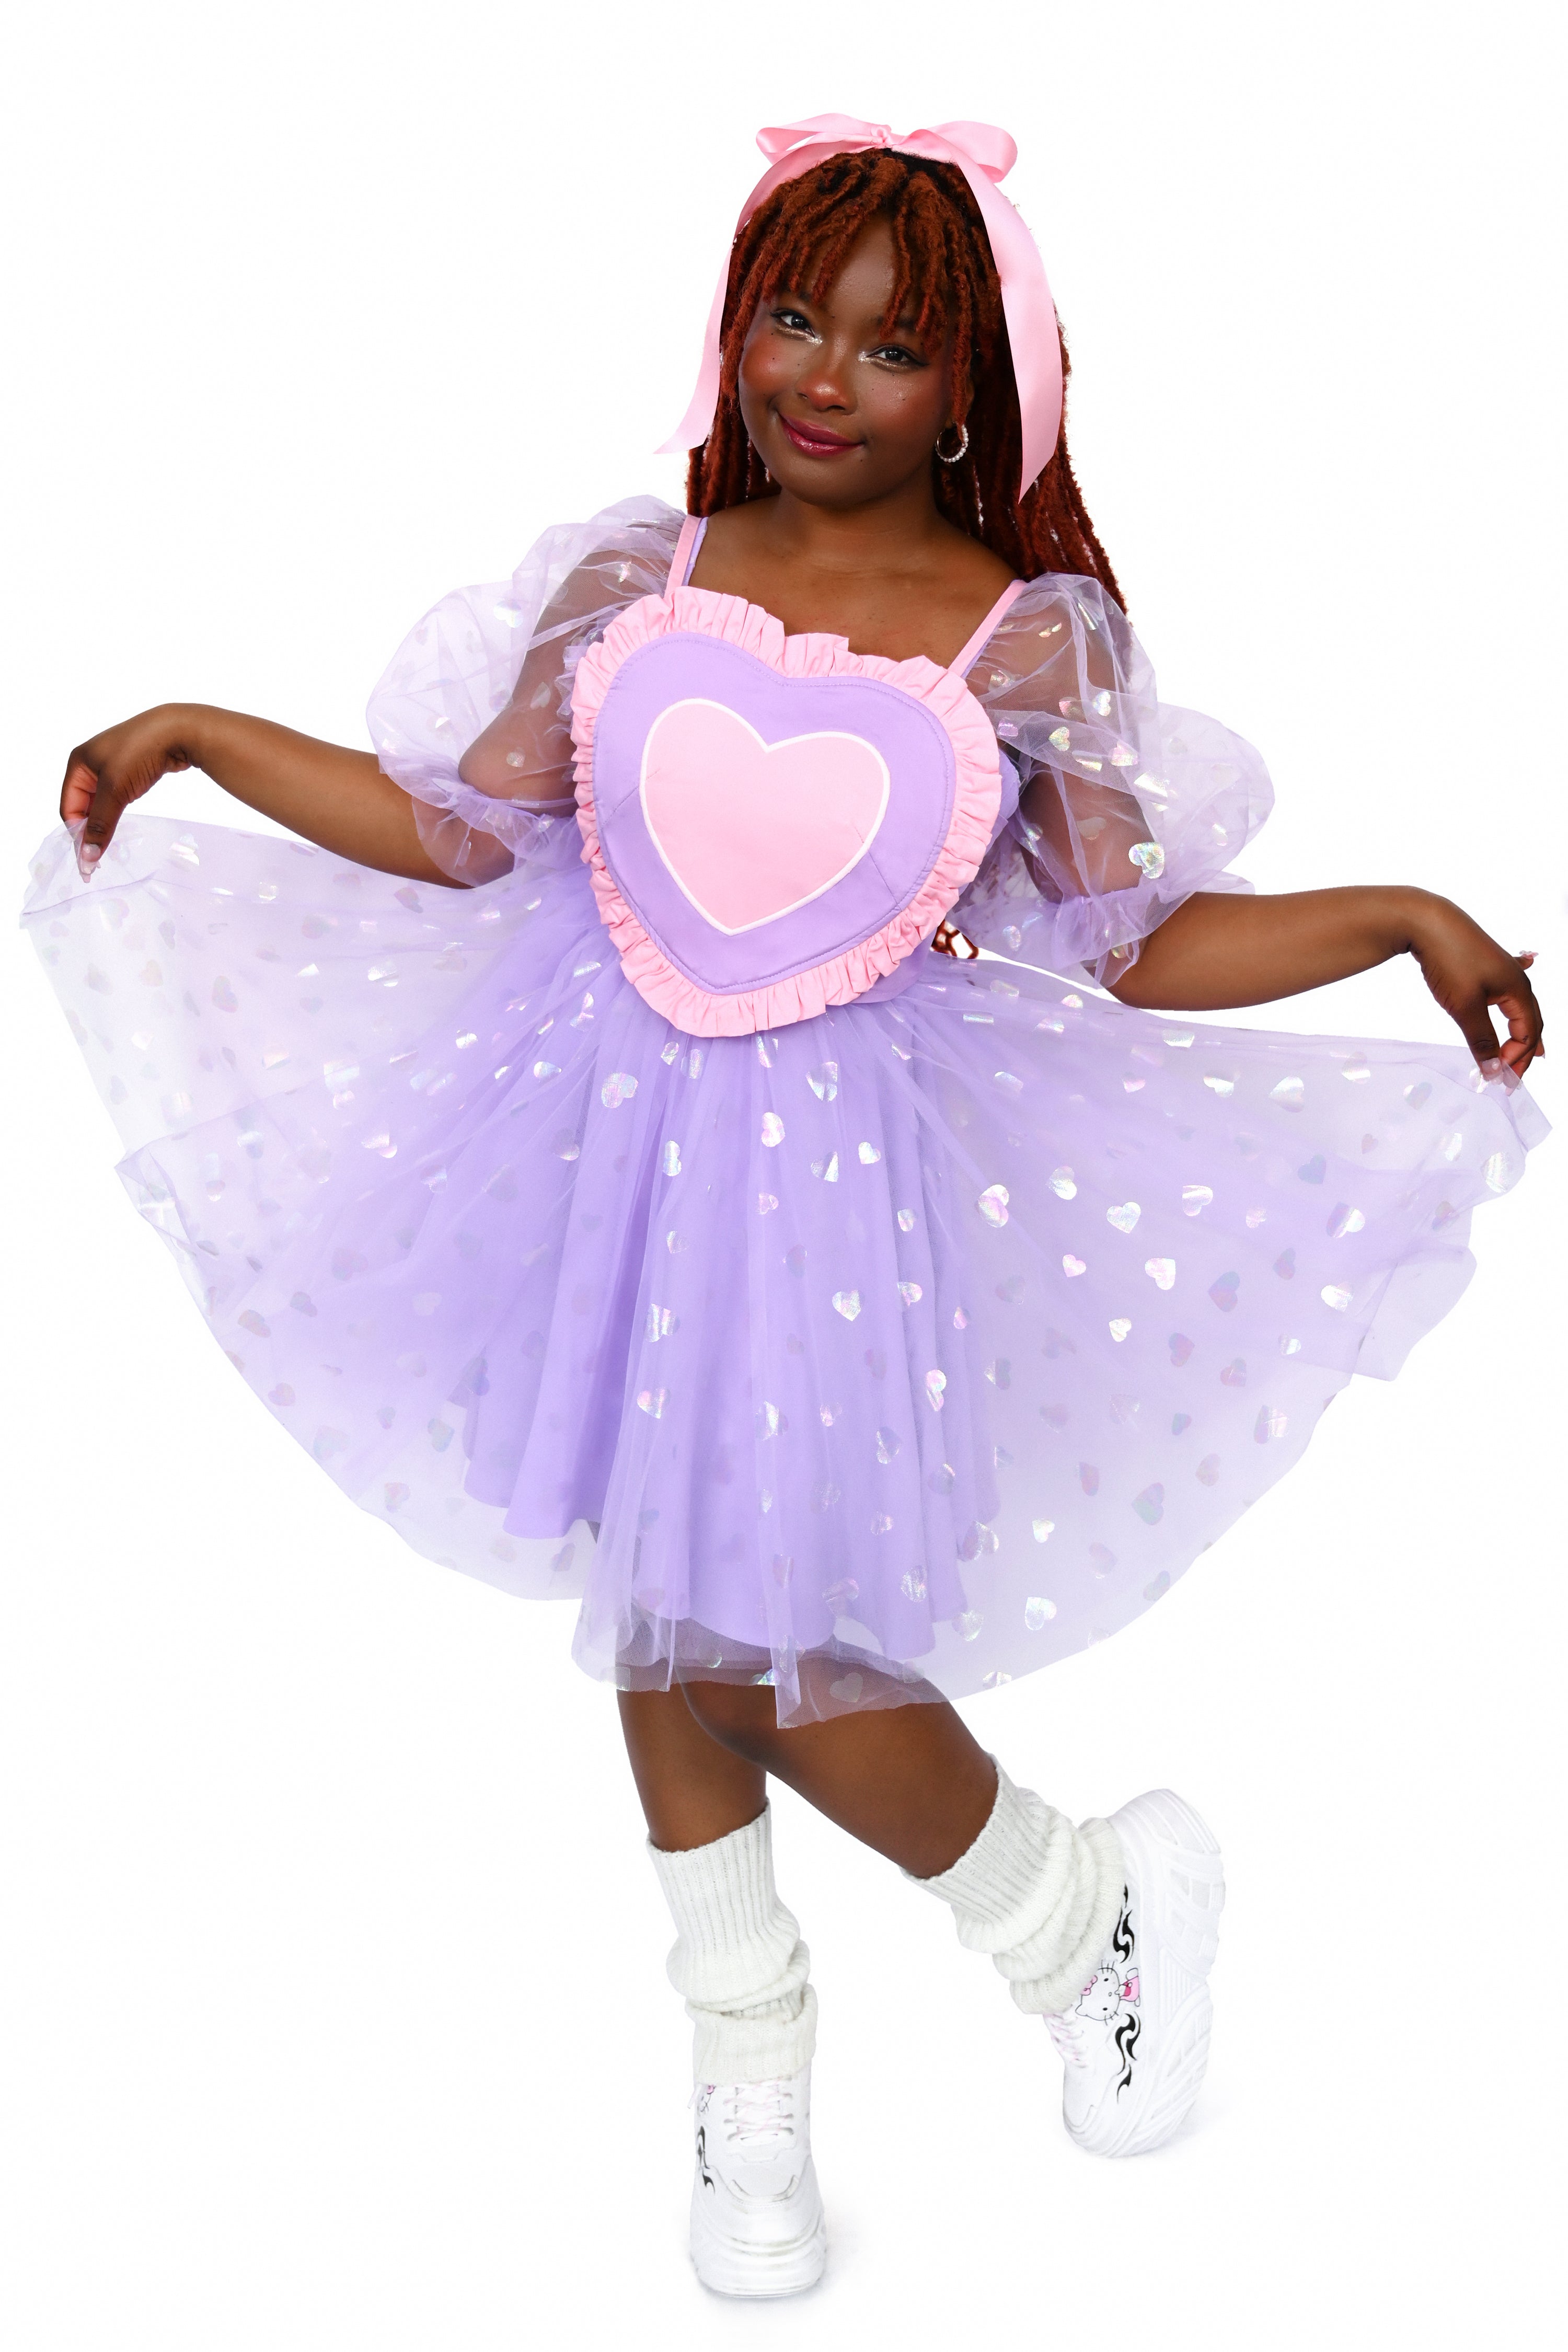 This pink, lavender, white, and light pink heart shaped corset top has adjustable straps and a lace-up back. The Base color of the corset top is lavender and a pink ruffle surrounds the other colours of the heart.